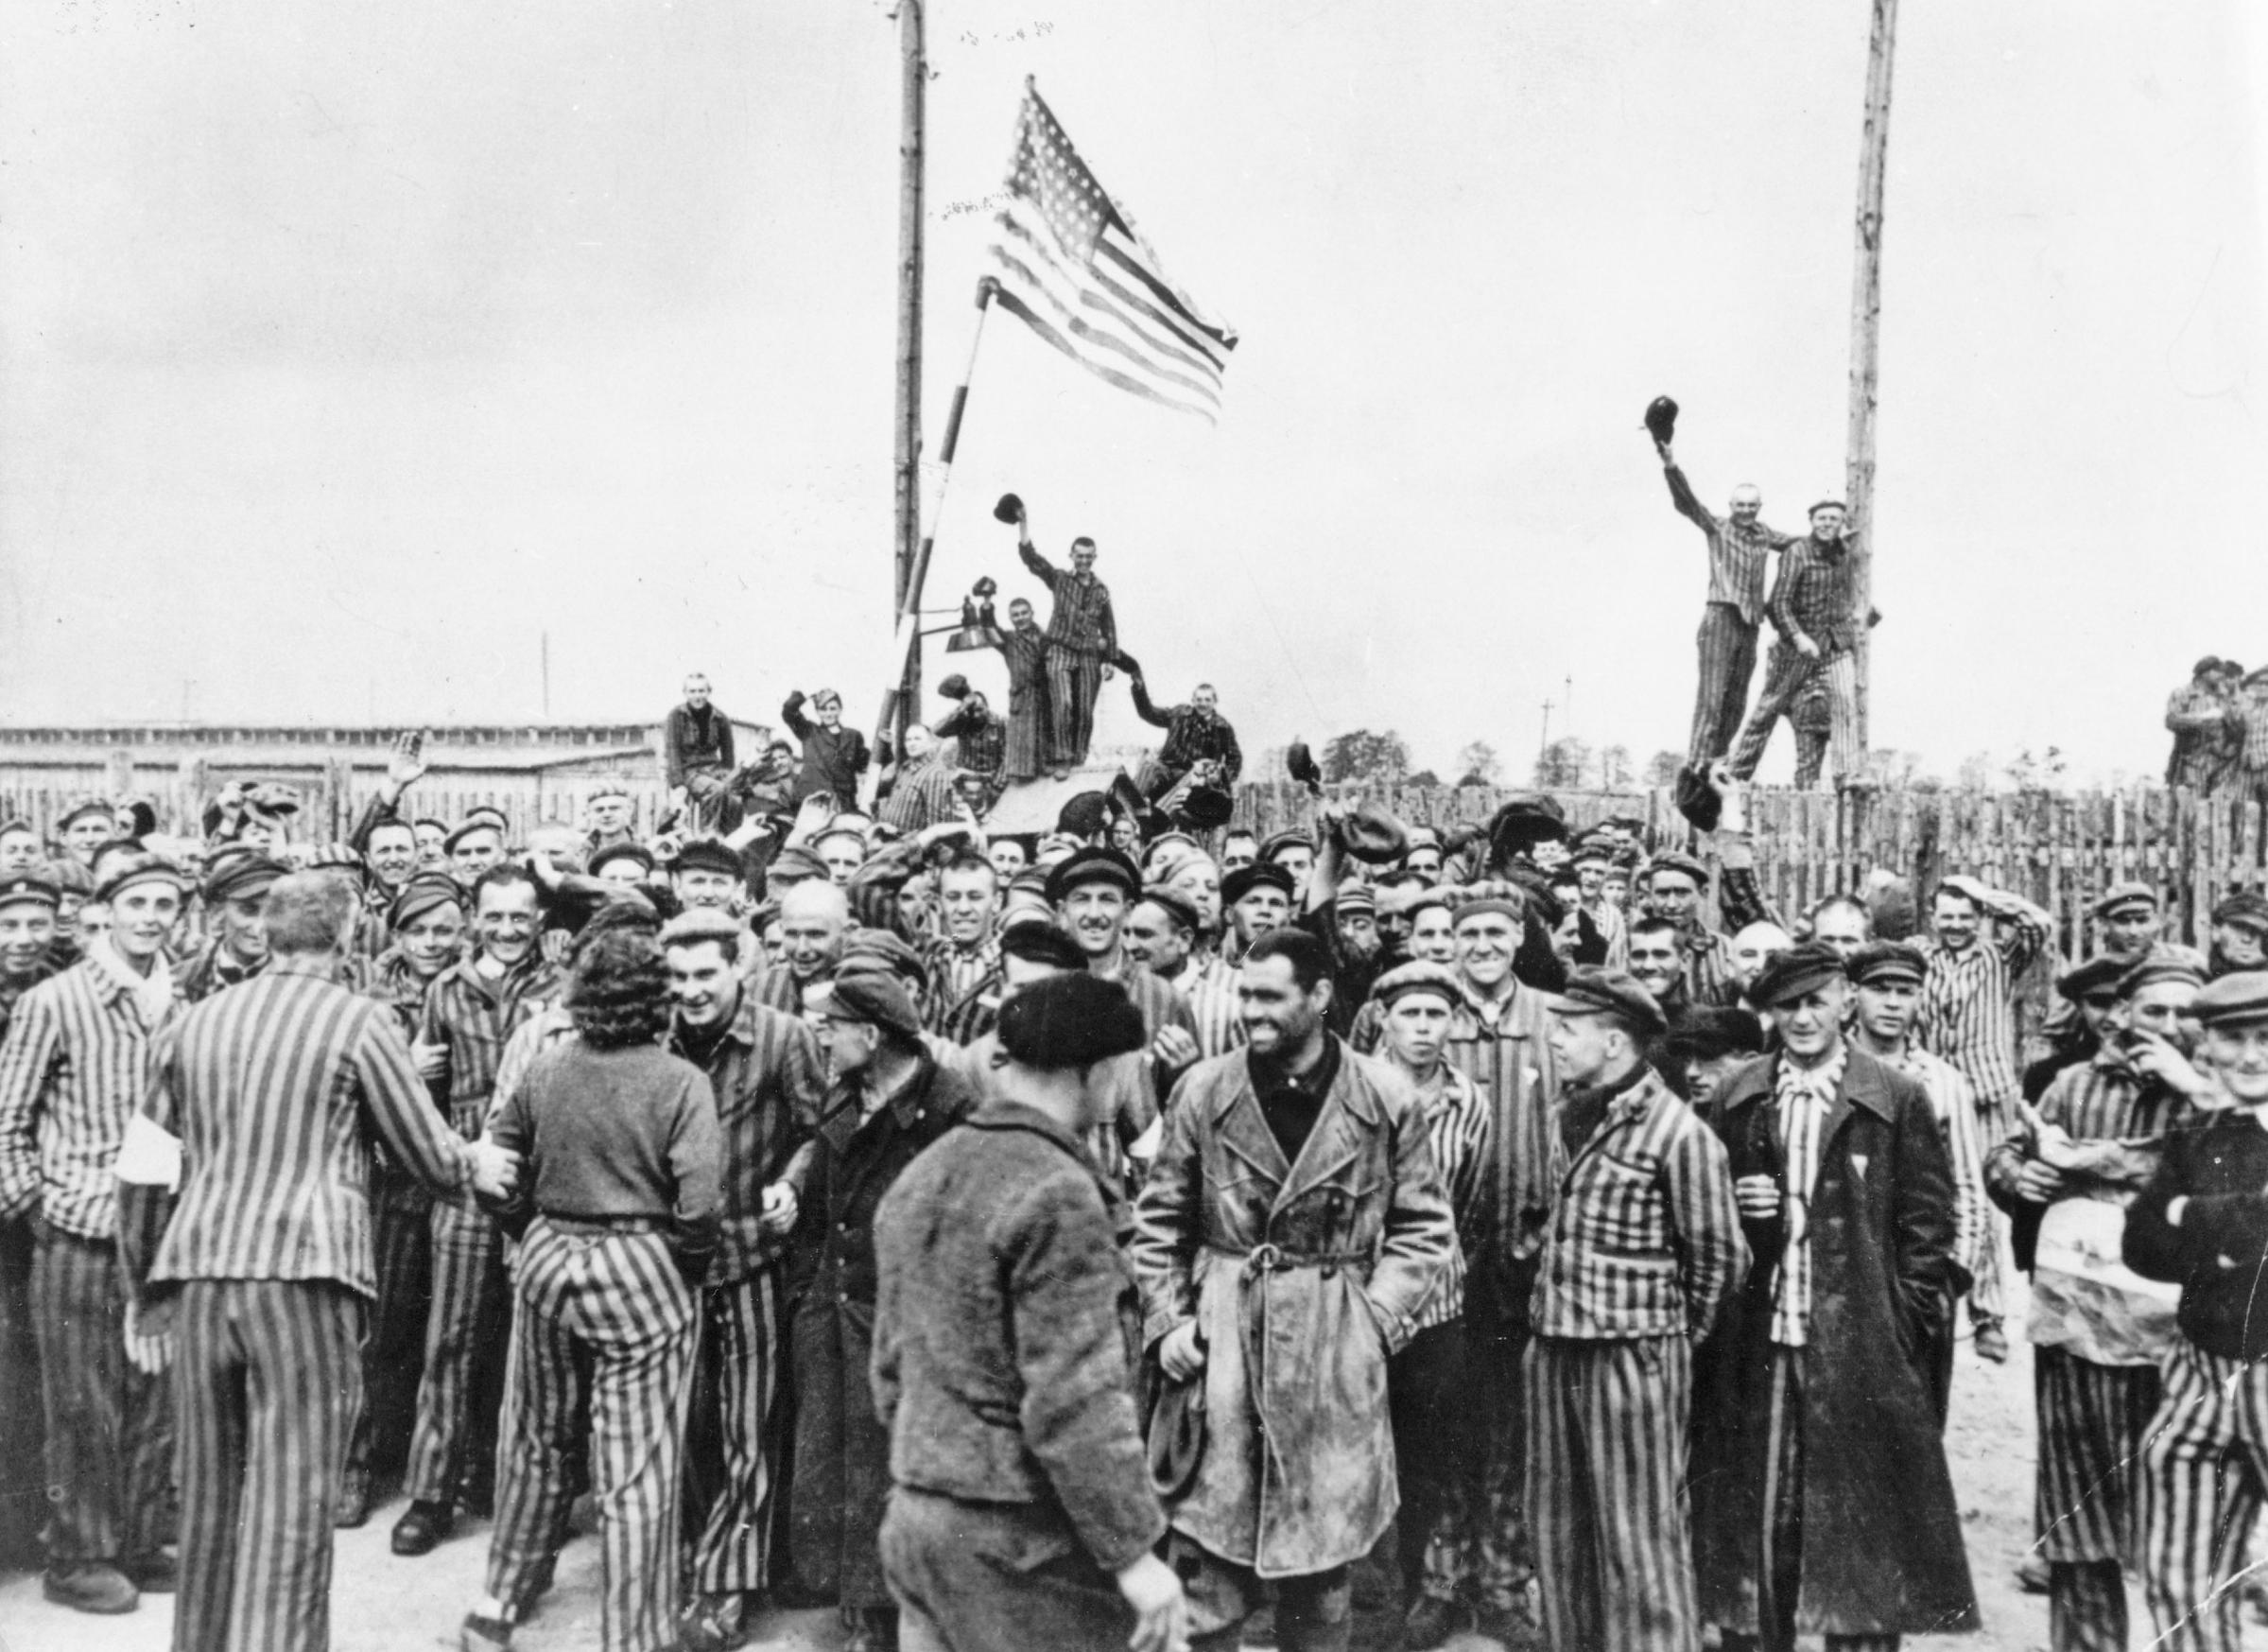 Germany, Third Reich - concentration camps 1939-45 Detainees from Dachau concentration camp gathering on the former place of roll call after the liberation by American soldiers